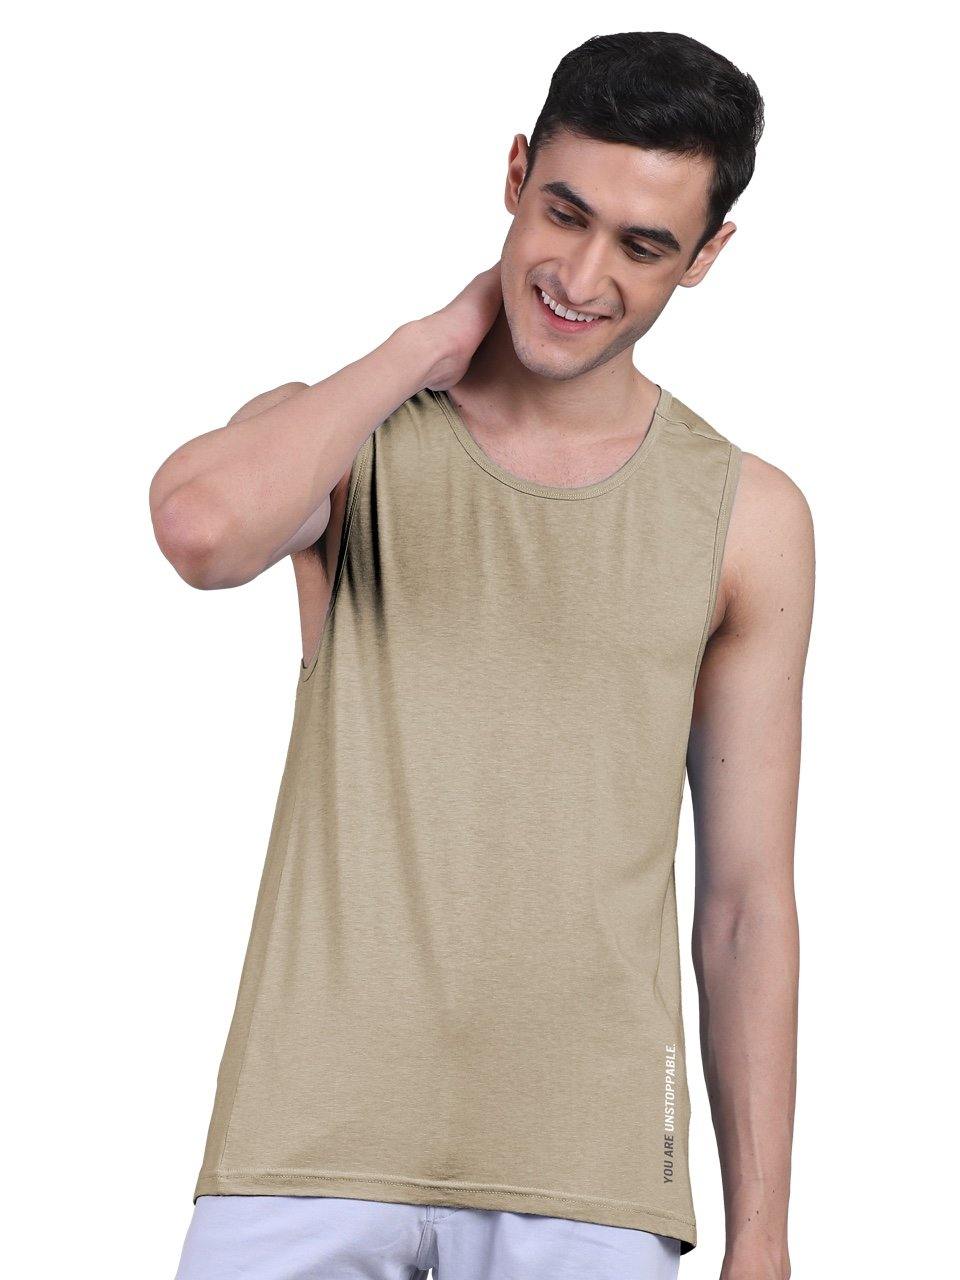 Twin Skin Organic Bamboo Vest - Active Fit (Pack of 4) - freecultr.com